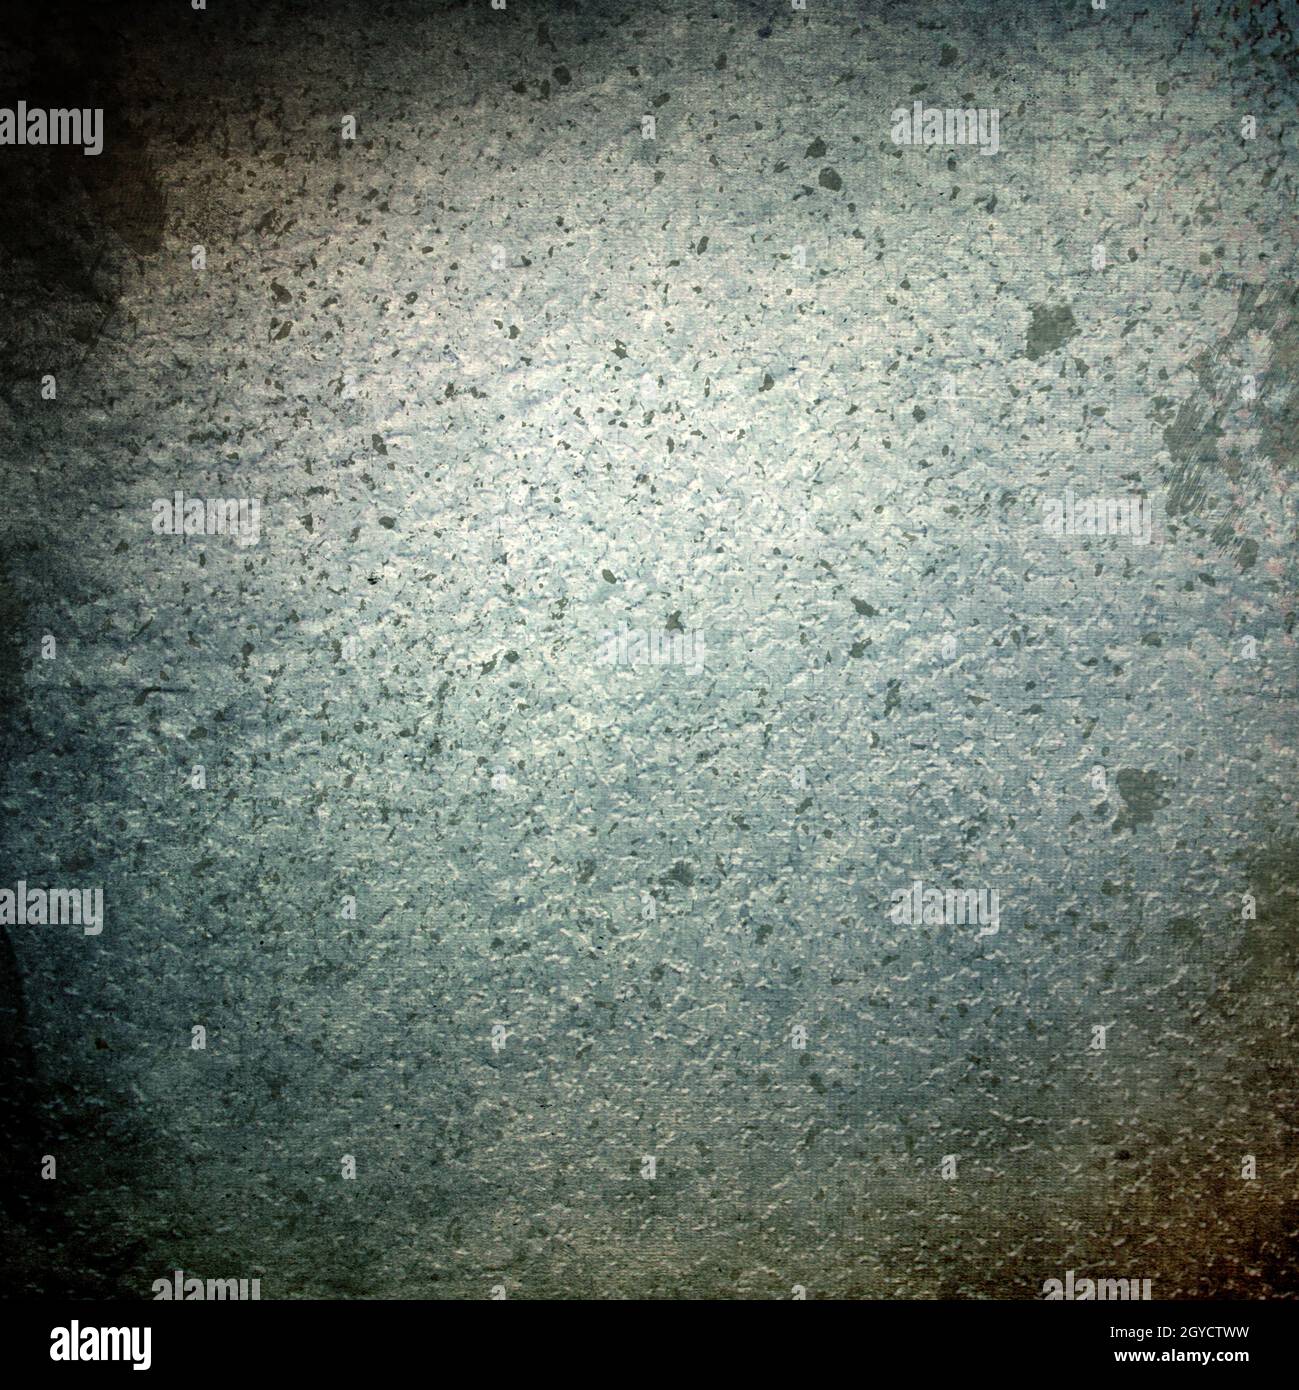 Dark coloured grunge background with scratches and stains Stock Photo